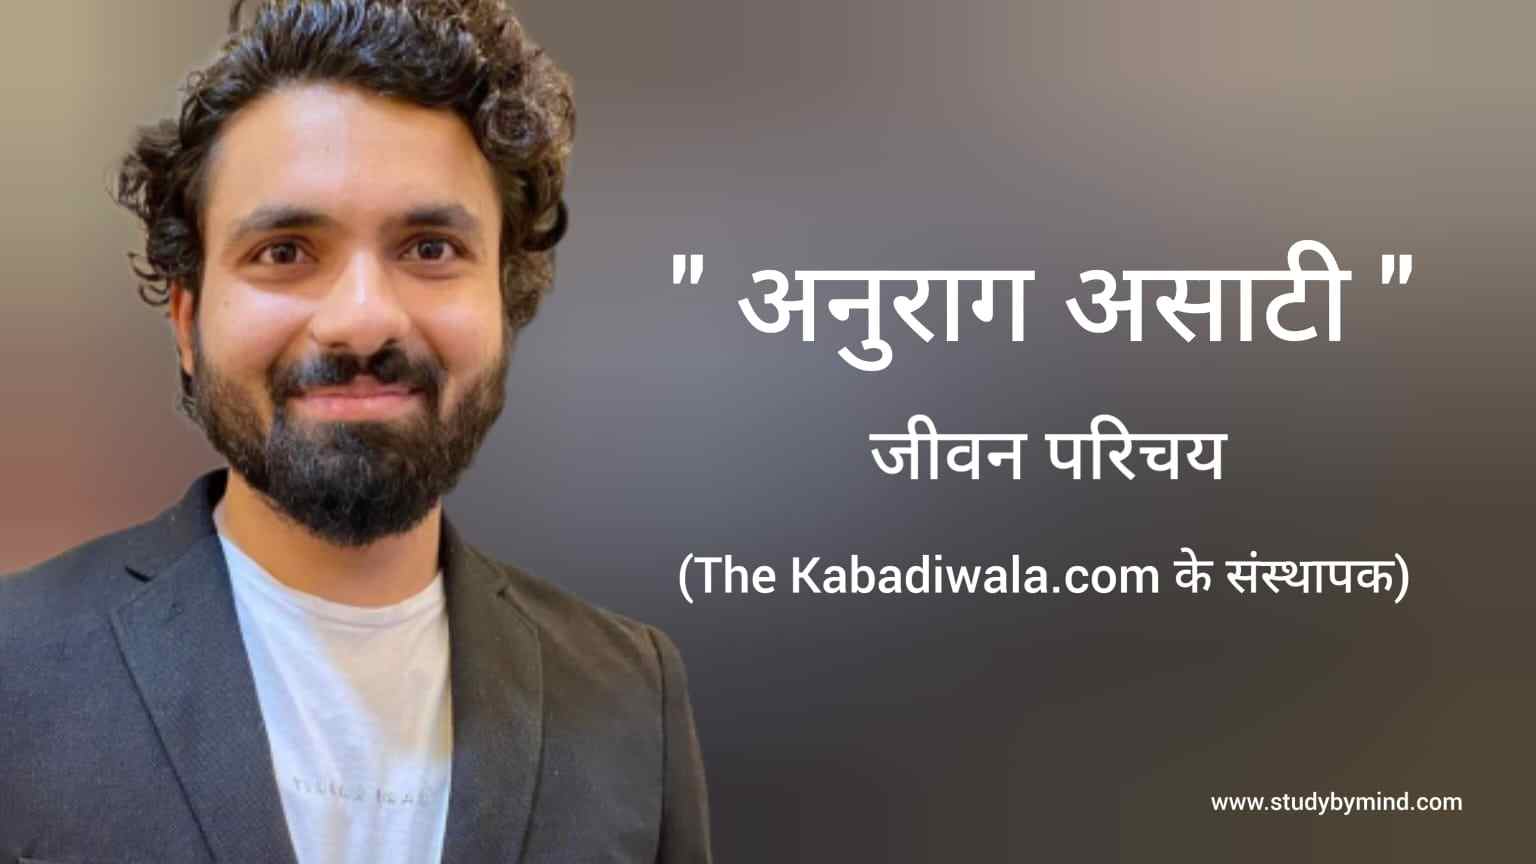 You are currently viewing अनुराग असाटी जीवन परिचय Anurag Asati biography in hindi (co-founder of The Kabadiwala.com)